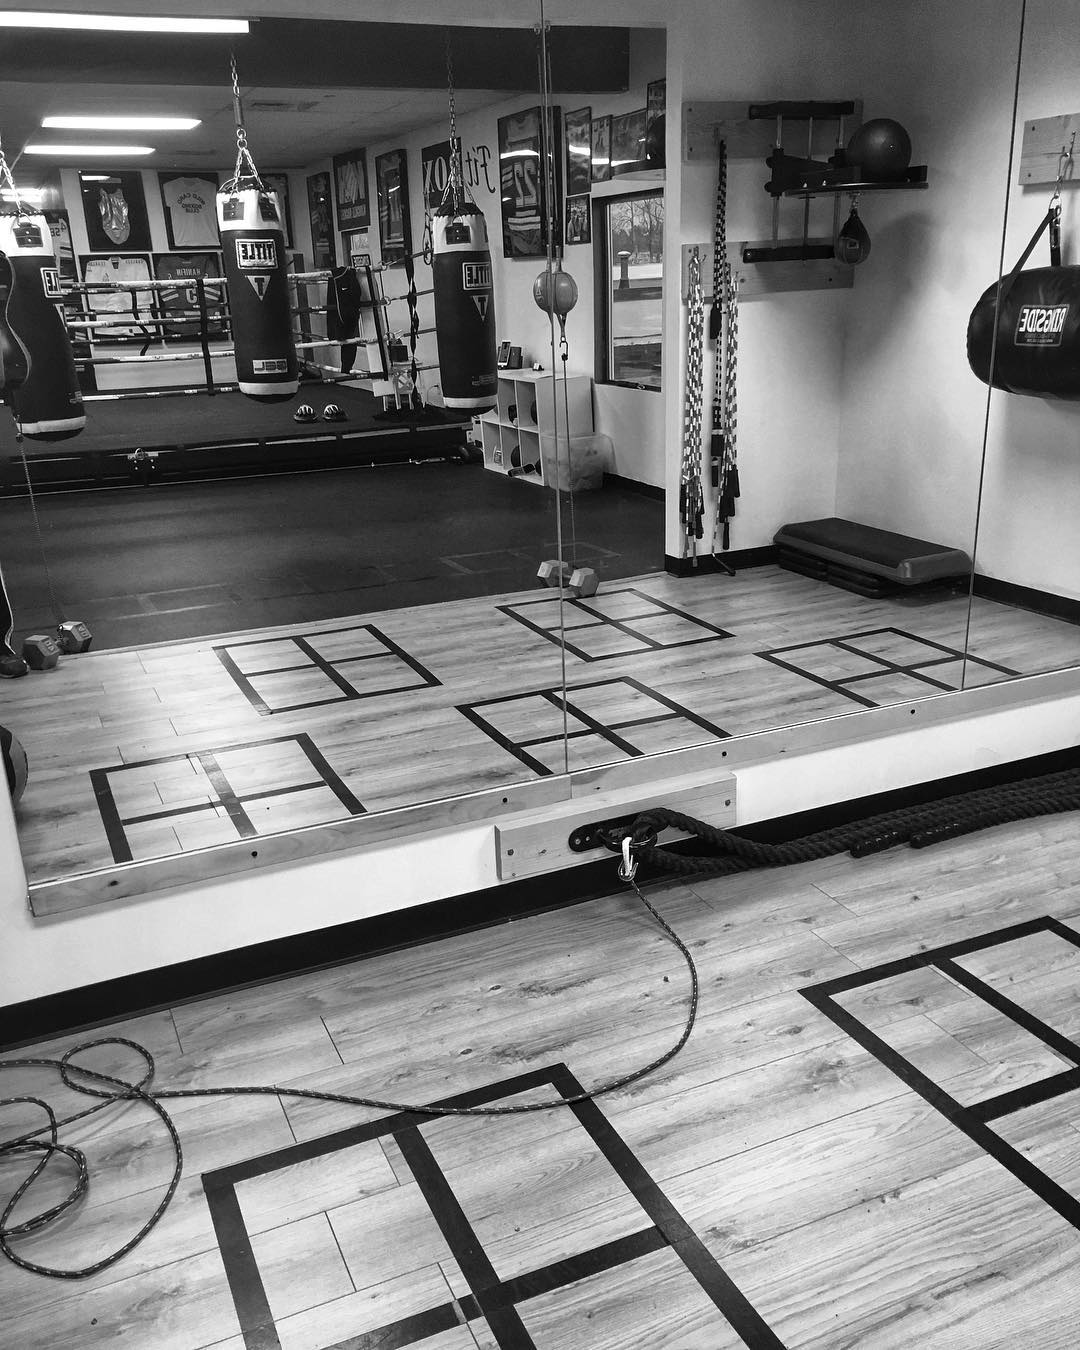 FitBOX - Boxing & Fitness in Dedham, Ma... Old school boxing meets New school trend with @tommymcinerney . Check it out www.fitboxdedham.com 
# #🥊